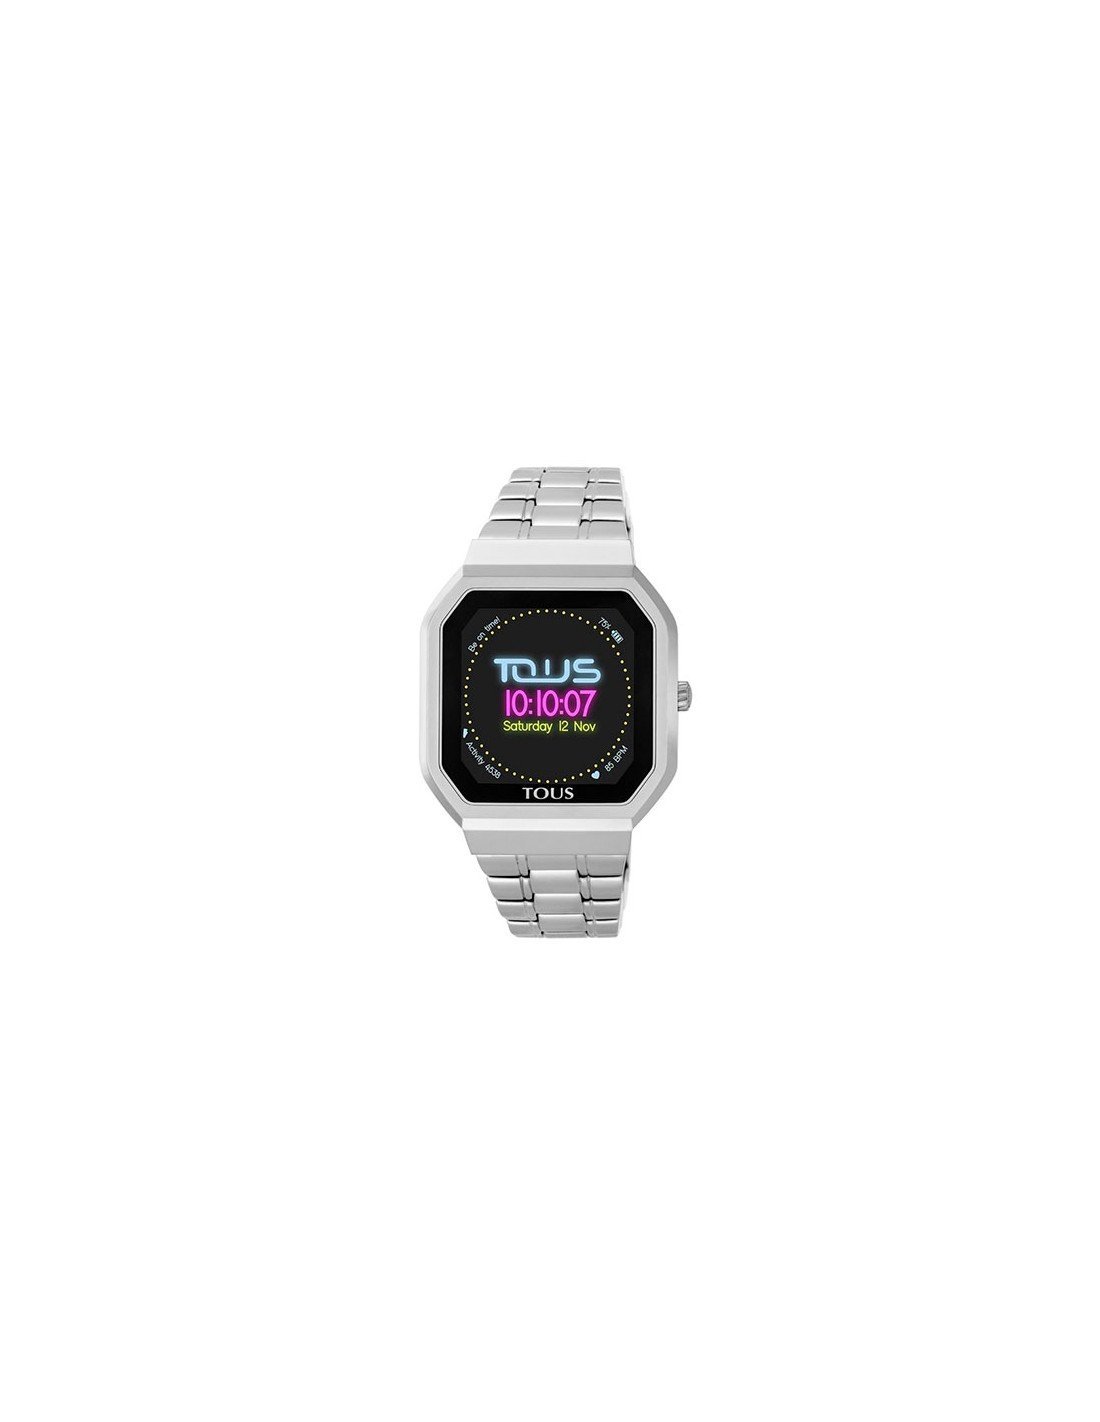 Tous B-Connect Silver Ip Steel Watch Rf 100350695, latest offers on Tous  Moda jewels